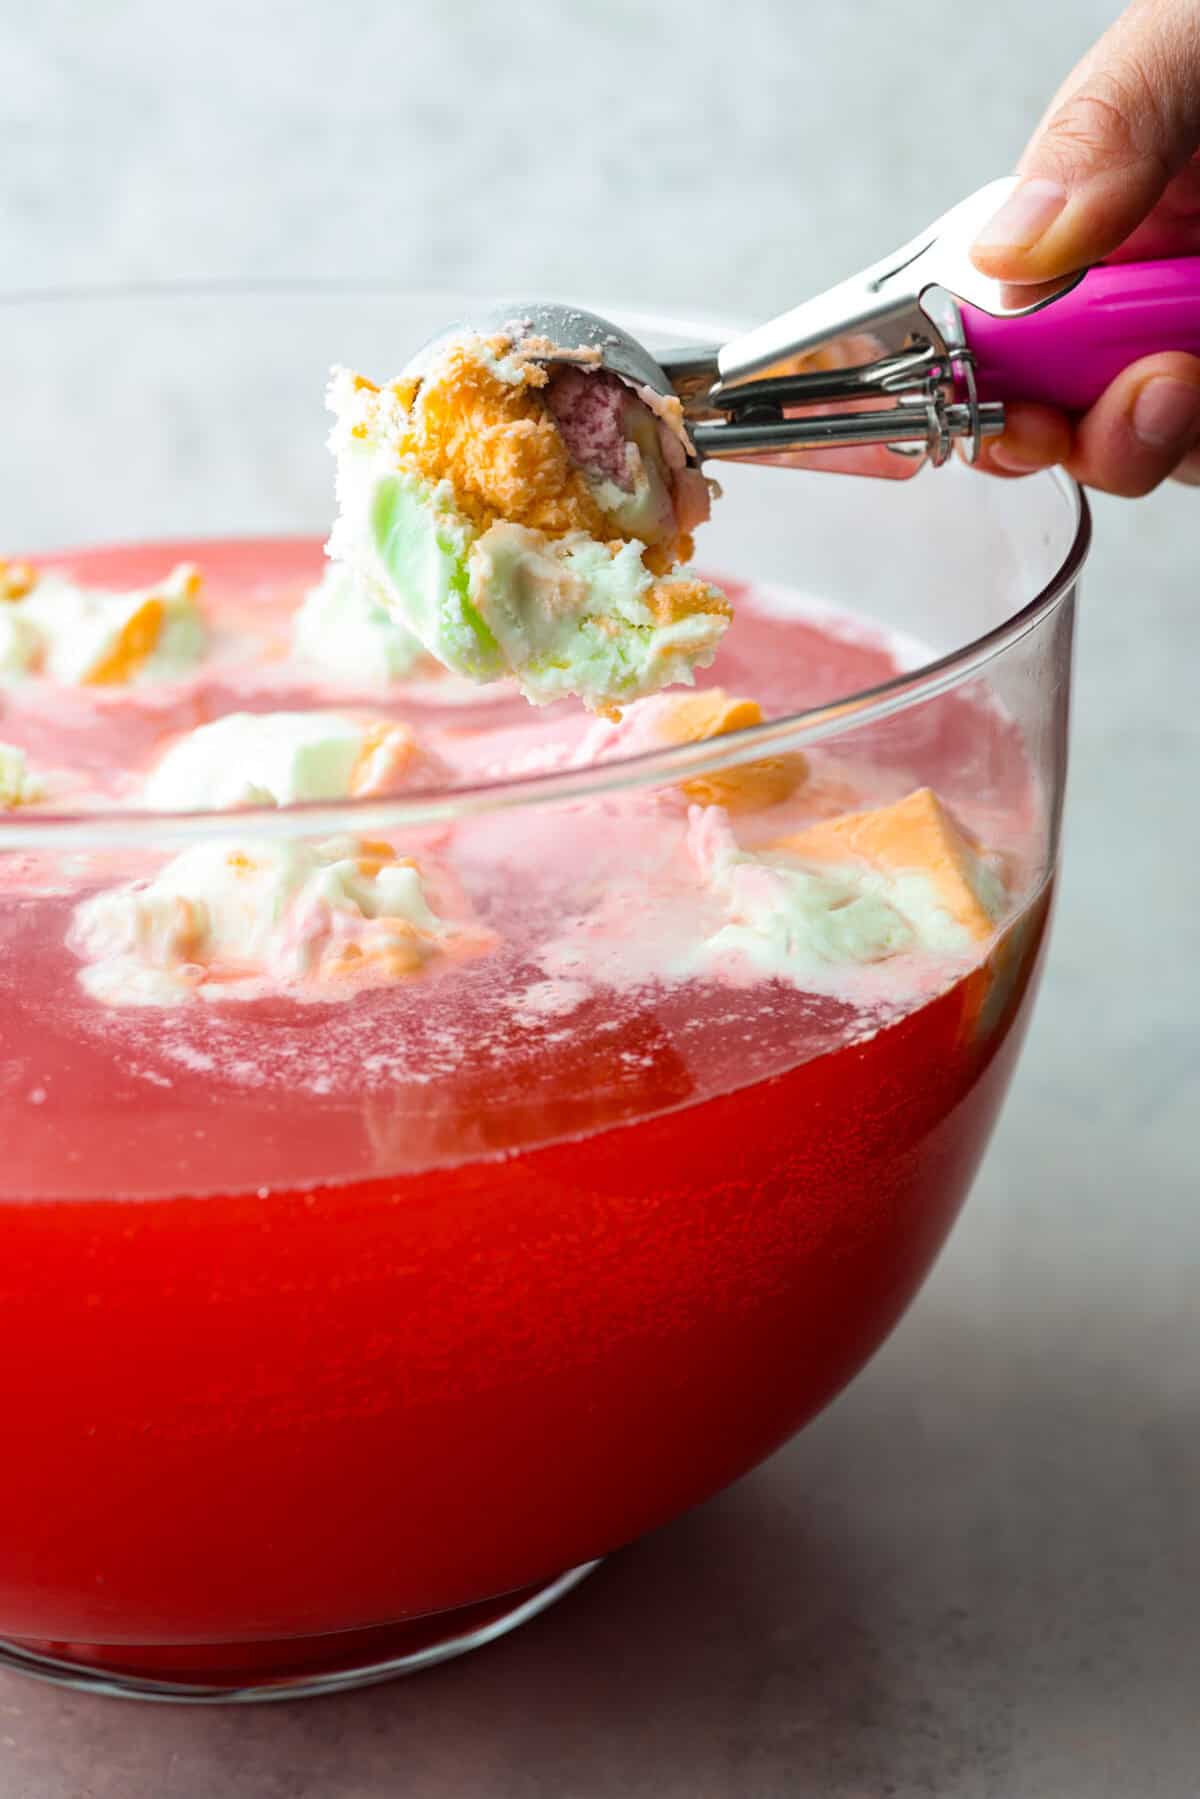 This is a picture of someone holding an ice cream scoop filled with rainbow sherbet over a large bowl filled with the drink and other dollops of rainbow sherbet. 